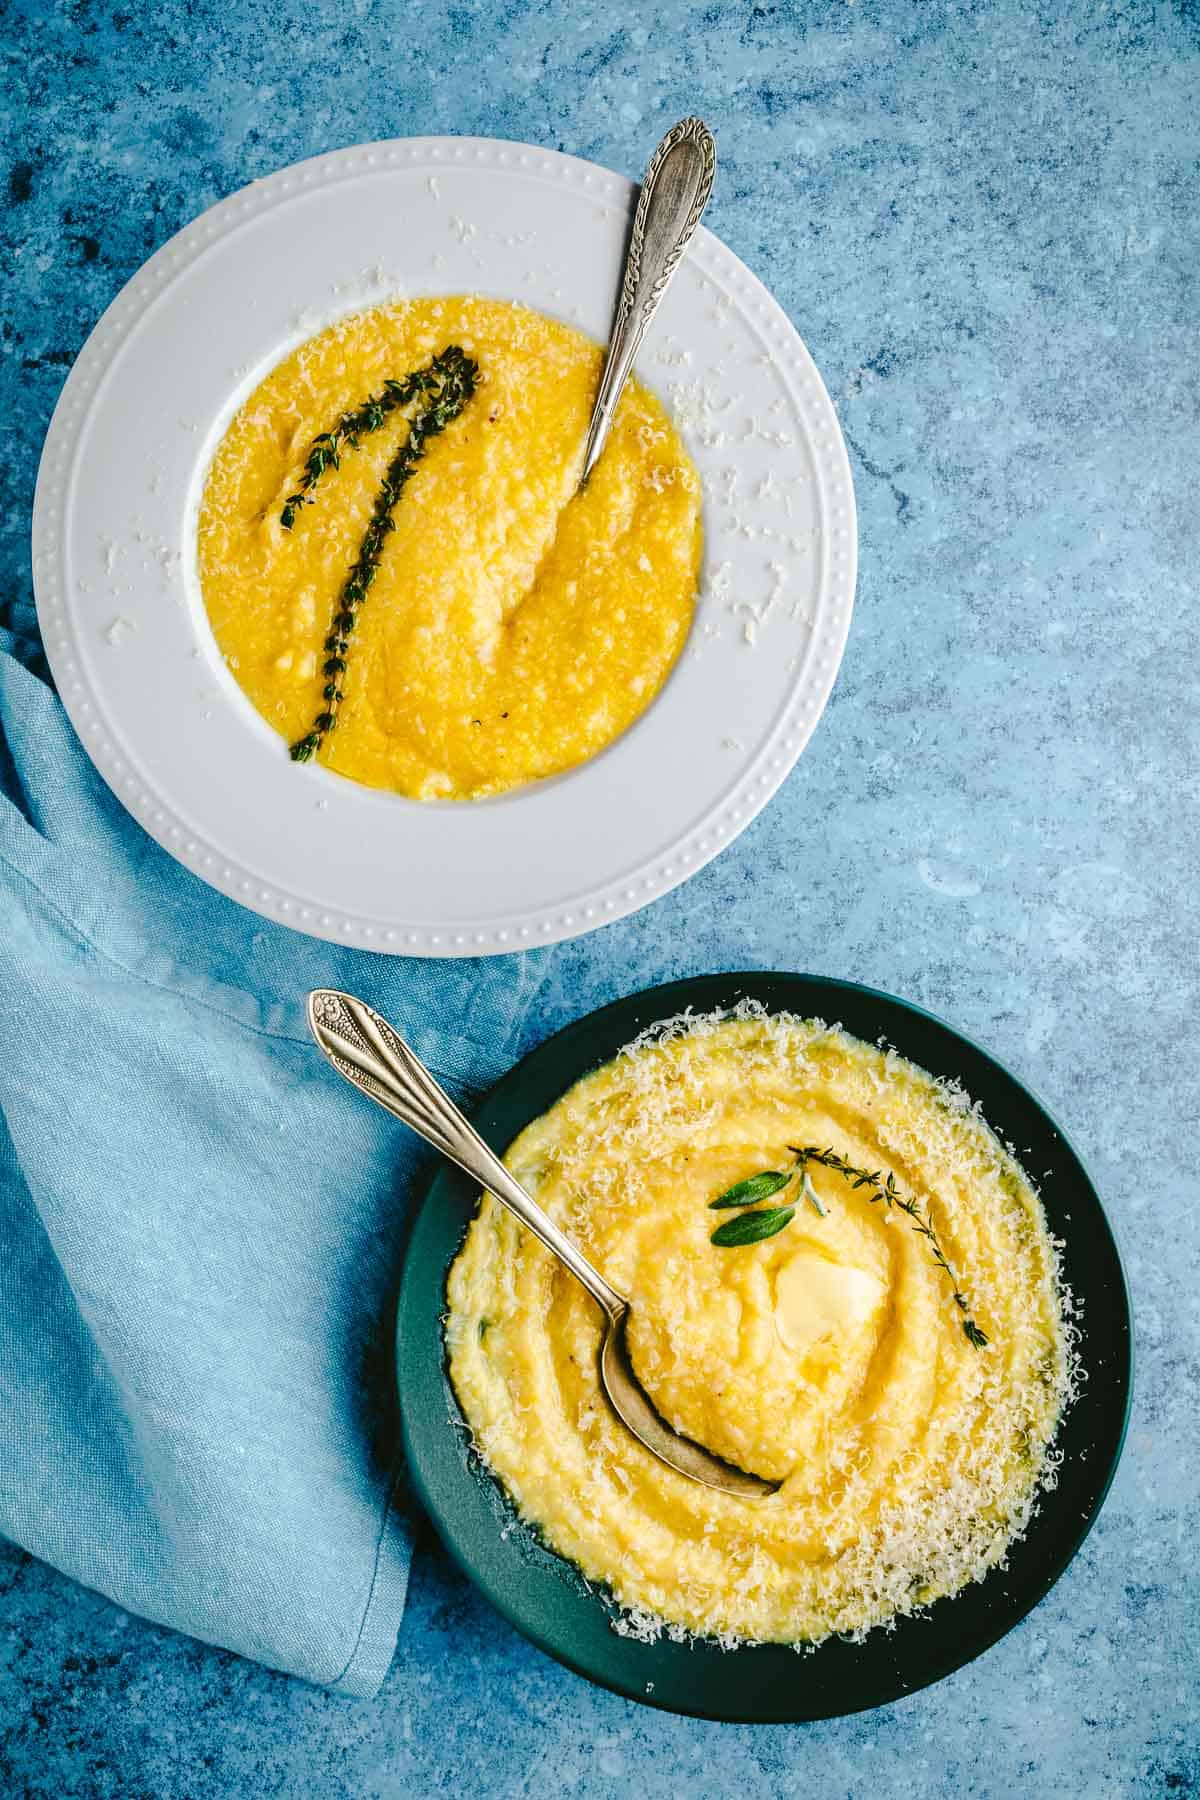 two bowls of polenta topped with parmigiano reggiano cheese and a sprig of thyme next to a cloth napkin.